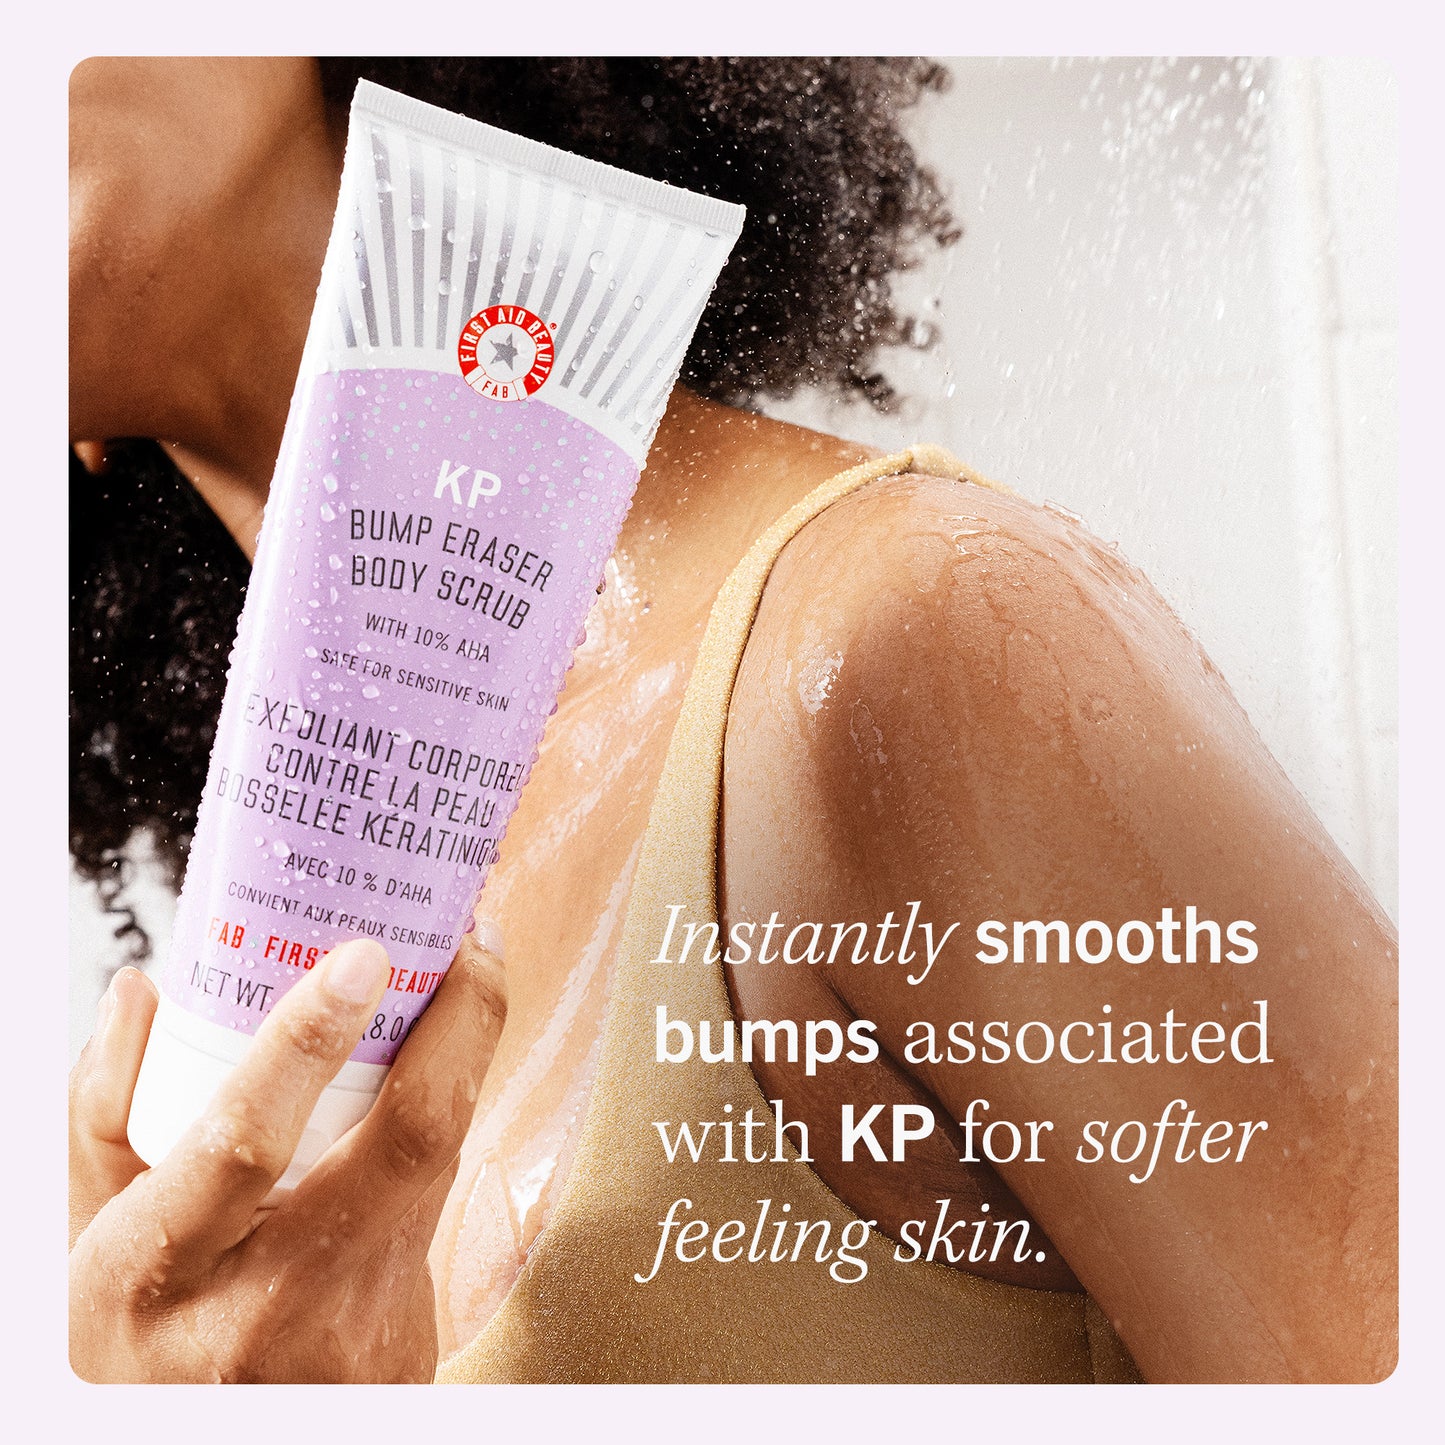 Model holding KP Bump Eraser Body Scrub.  Instantly smooths bumps associated with KP for softer feeling skin.